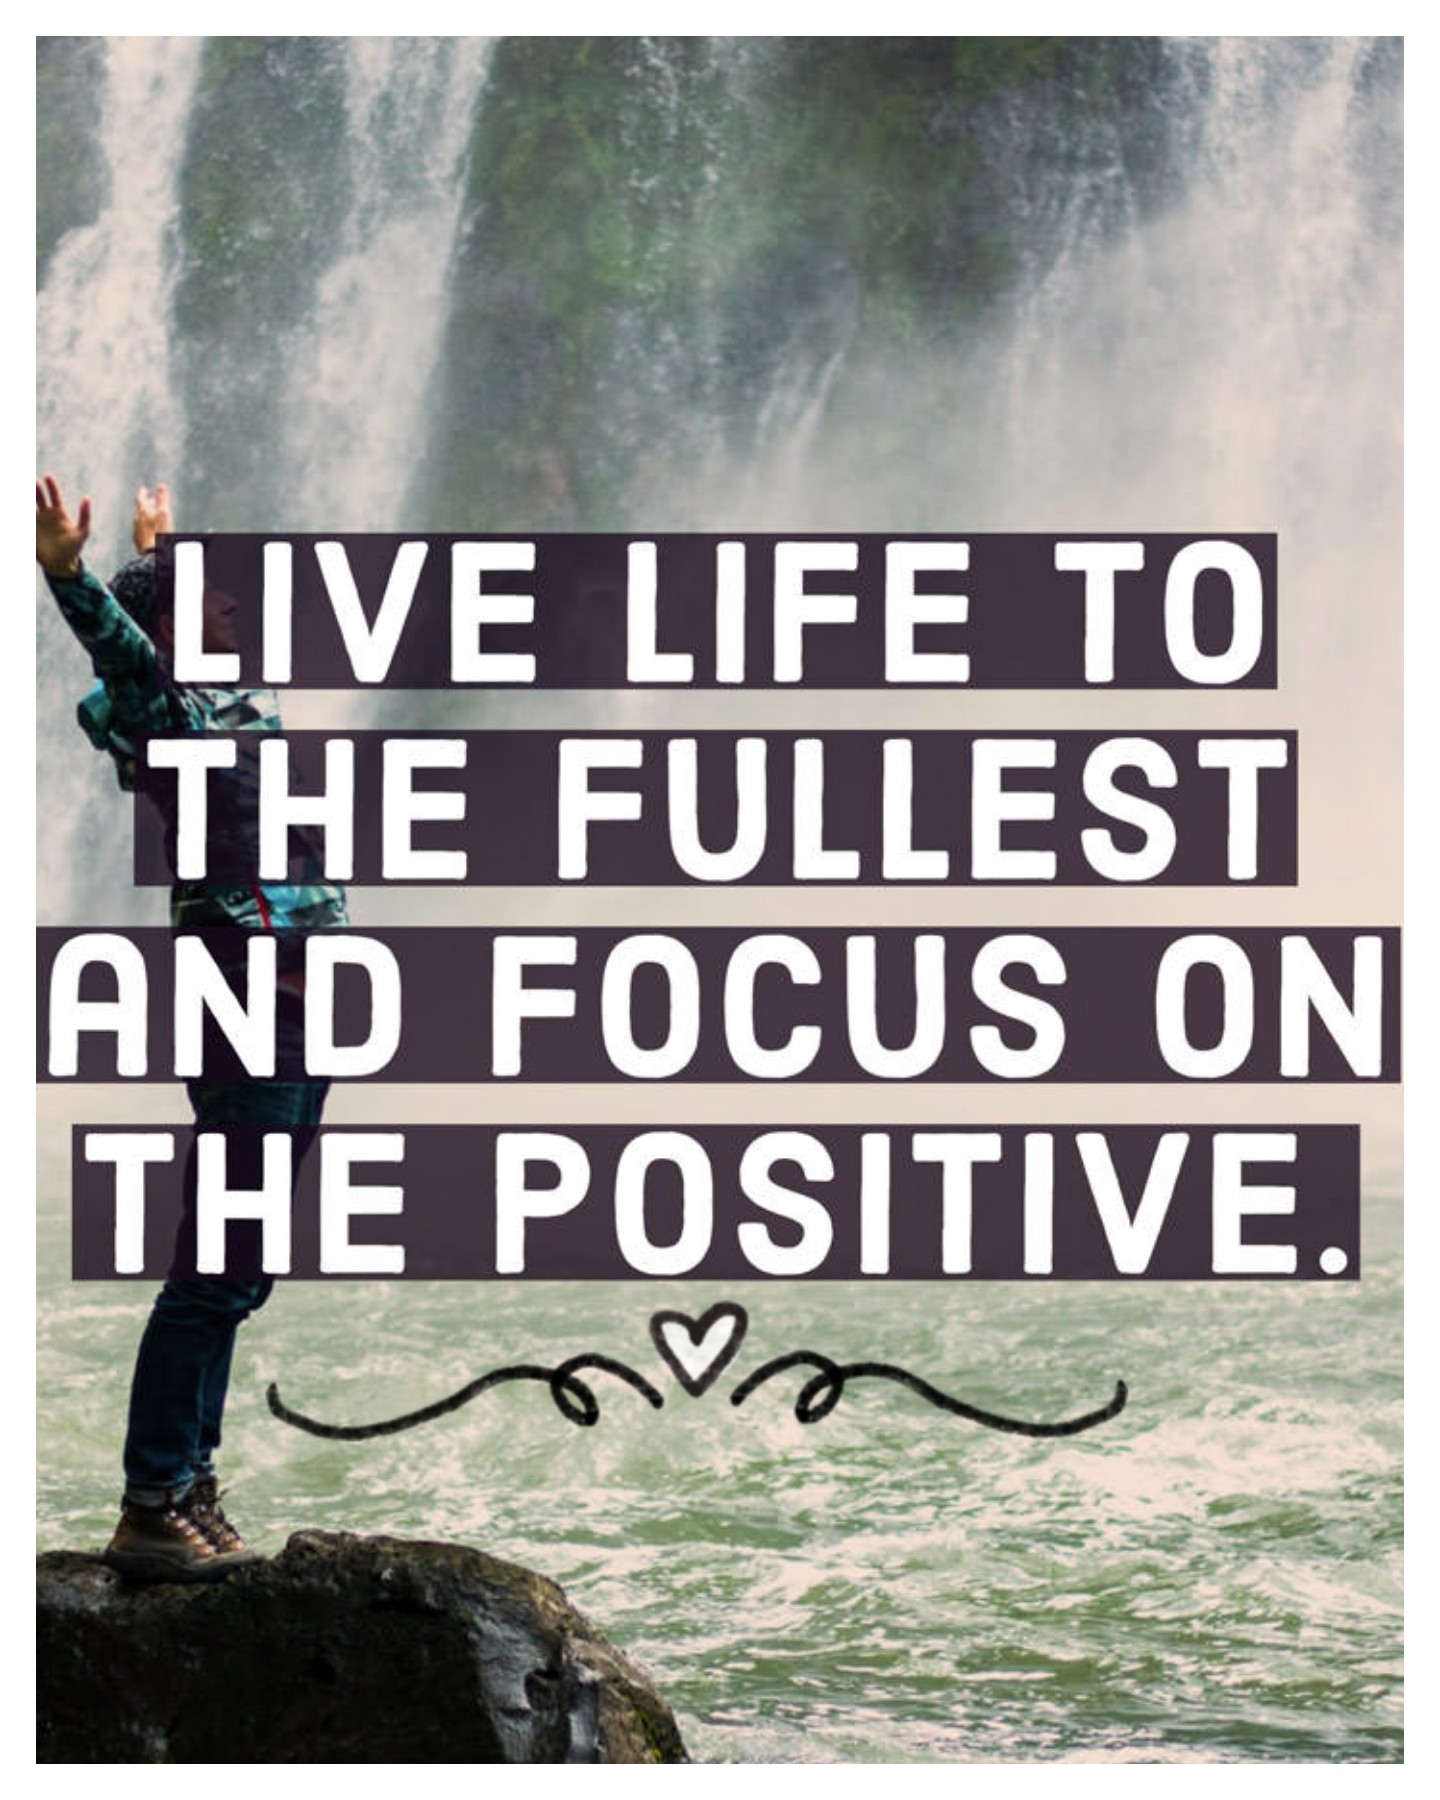 "Live life to the fullest and focus on the positive."